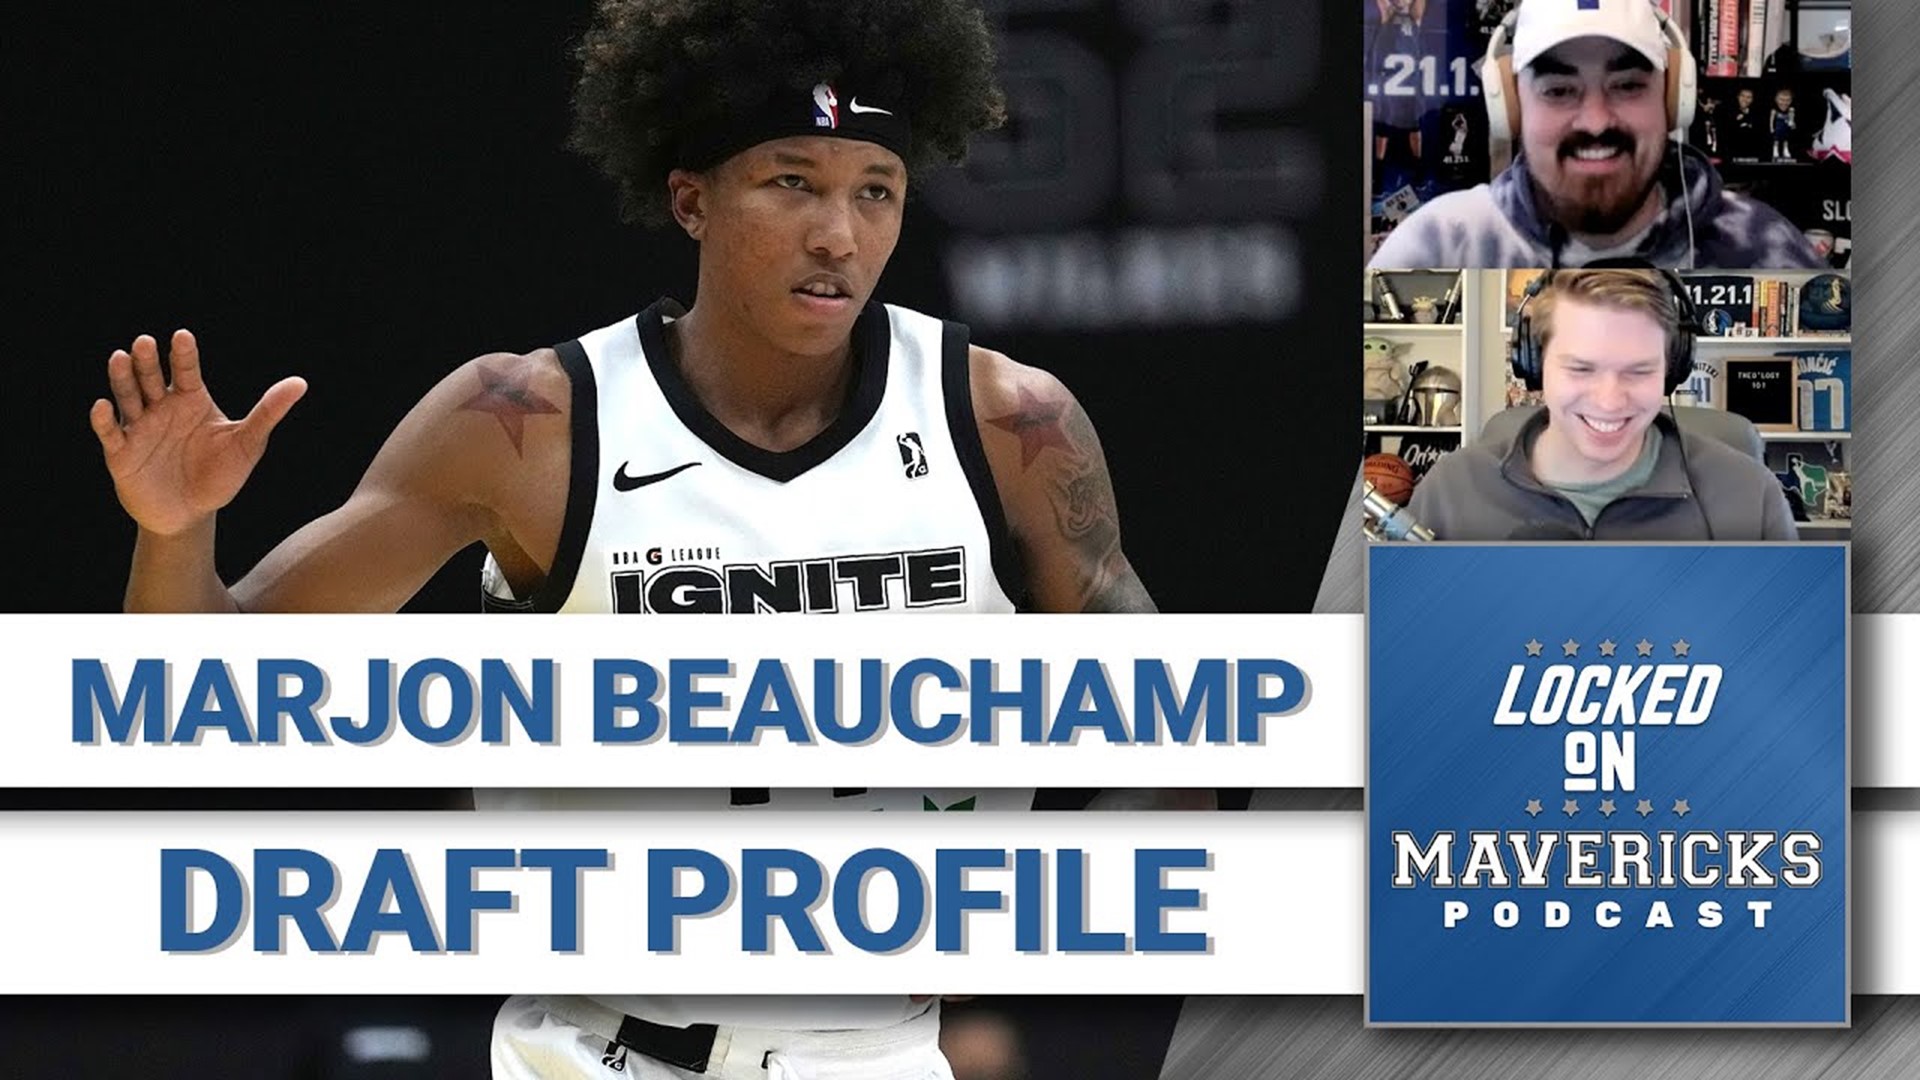 Nick Angstadt & Isaac Harris breakdown Marjon Beauchamp from the G-League Ignite, his three-point jumper is questionable but his defense and his story are amazing.